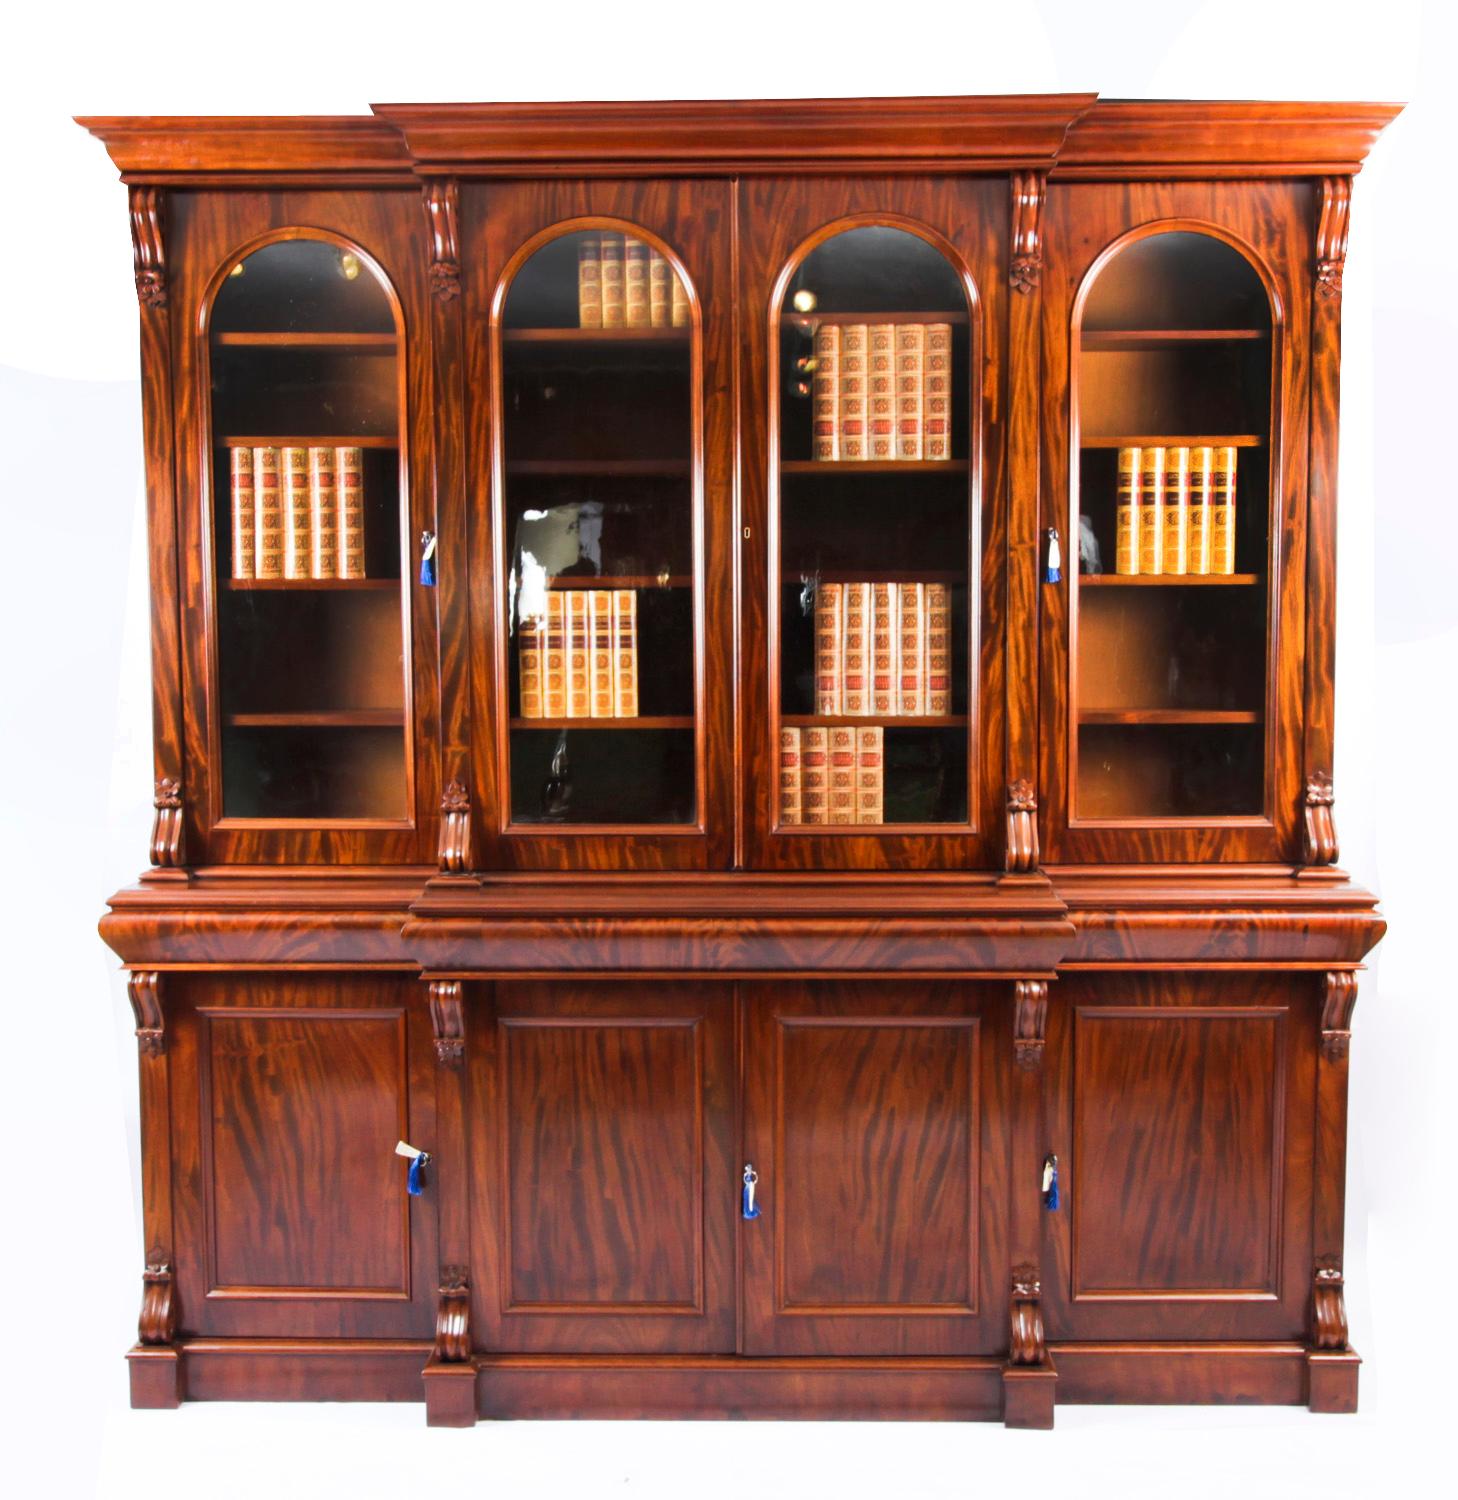 This is a beautiful antique Victorian flame mahogany four door library breakfront bookcase, masterfully crafted in rich solid mahogany, Circa 1860 in date.

This magnificent bookcase features four arched top glazed doors in the upper section